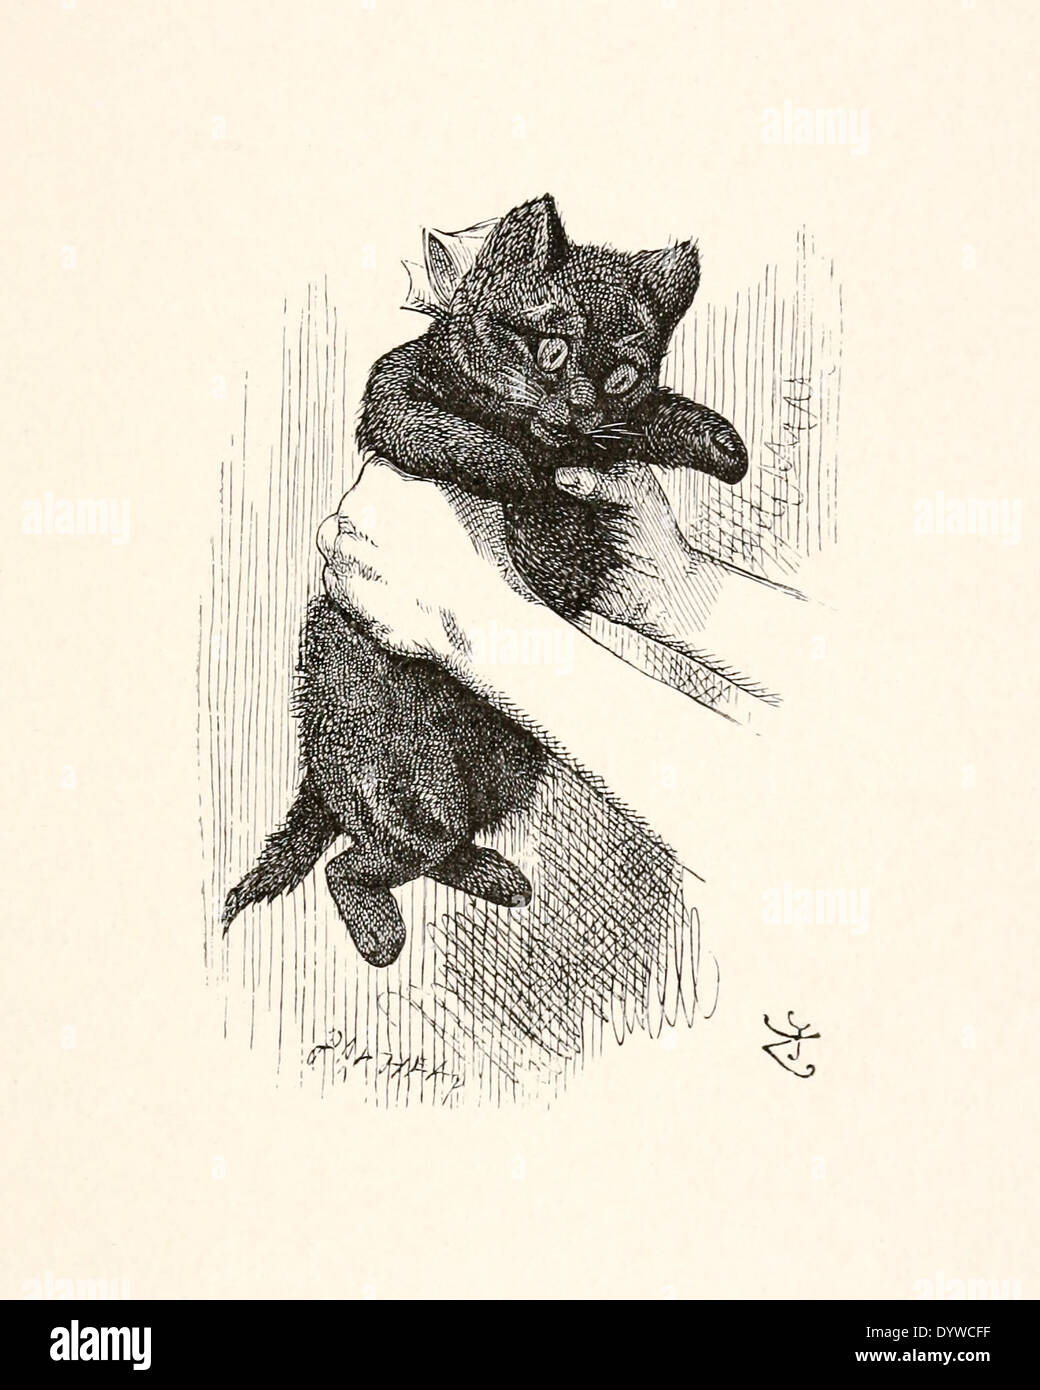 John Tenniel (1820-1914) illustration from Lewis Carroll's 'Through the Looking-Glass’ published in 1871. The Black Kitten Stock Photo